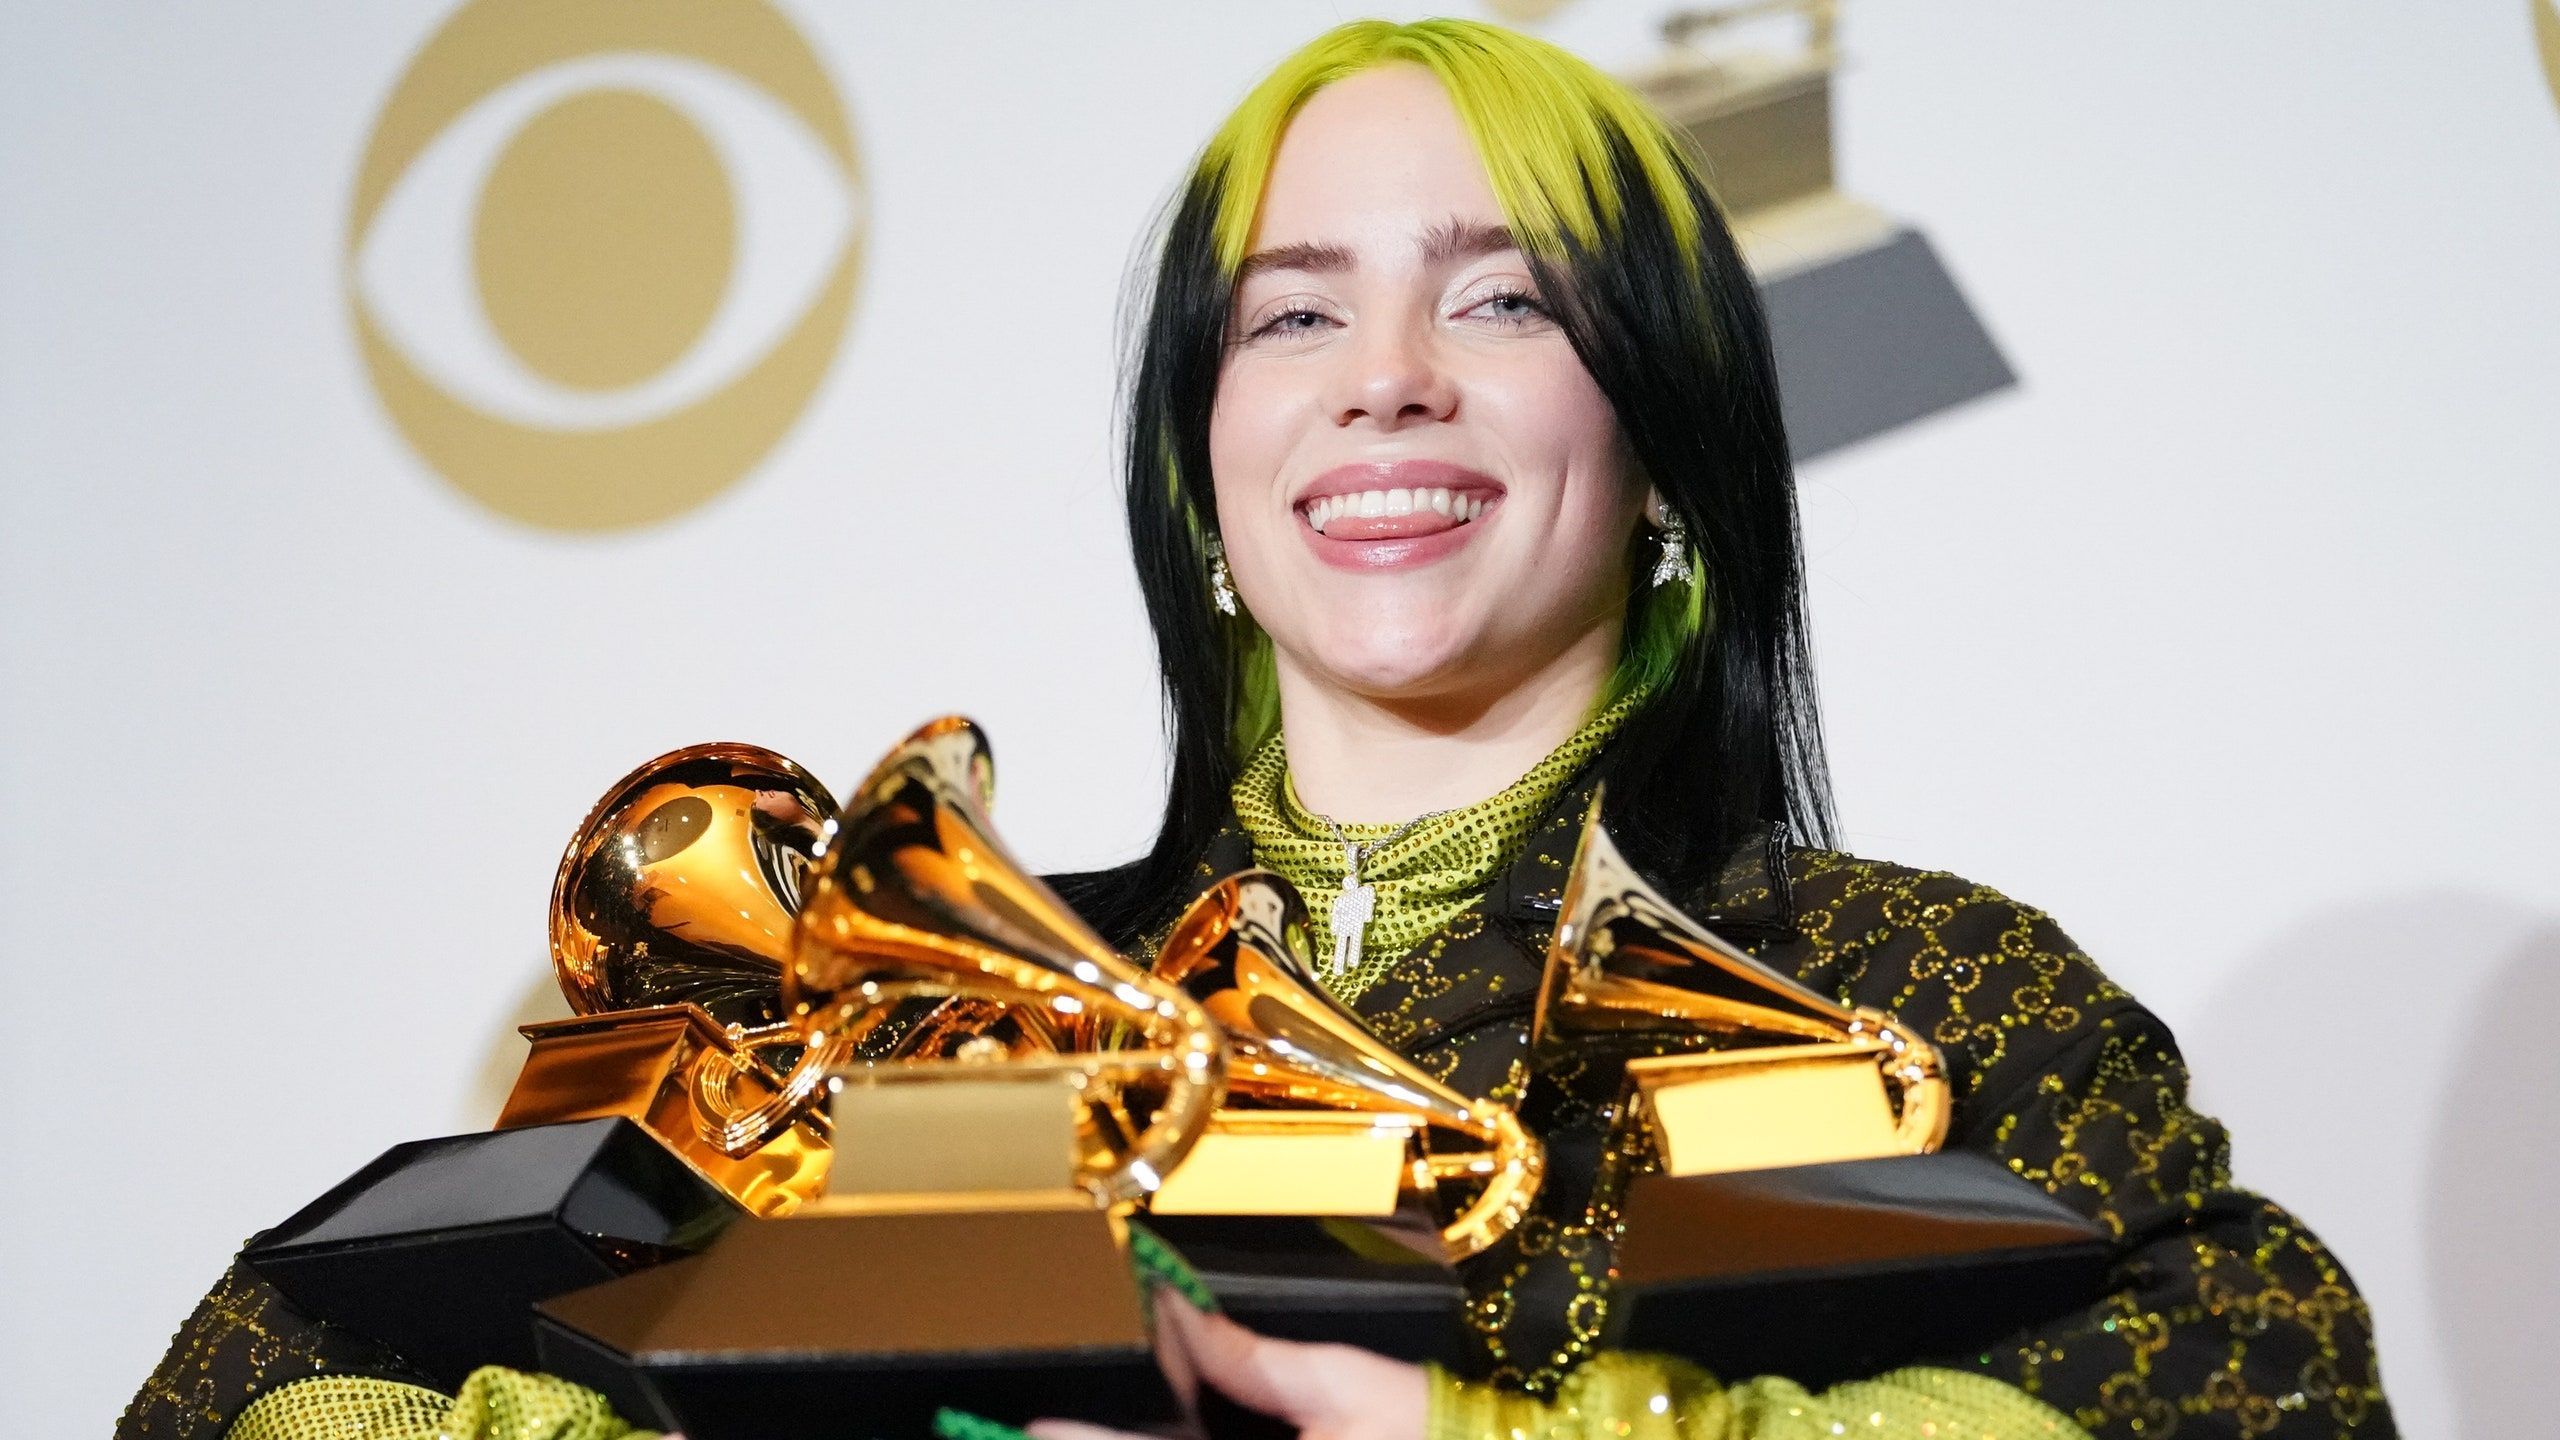 Grammy Nominations 2021: See Full List of Nominees Here